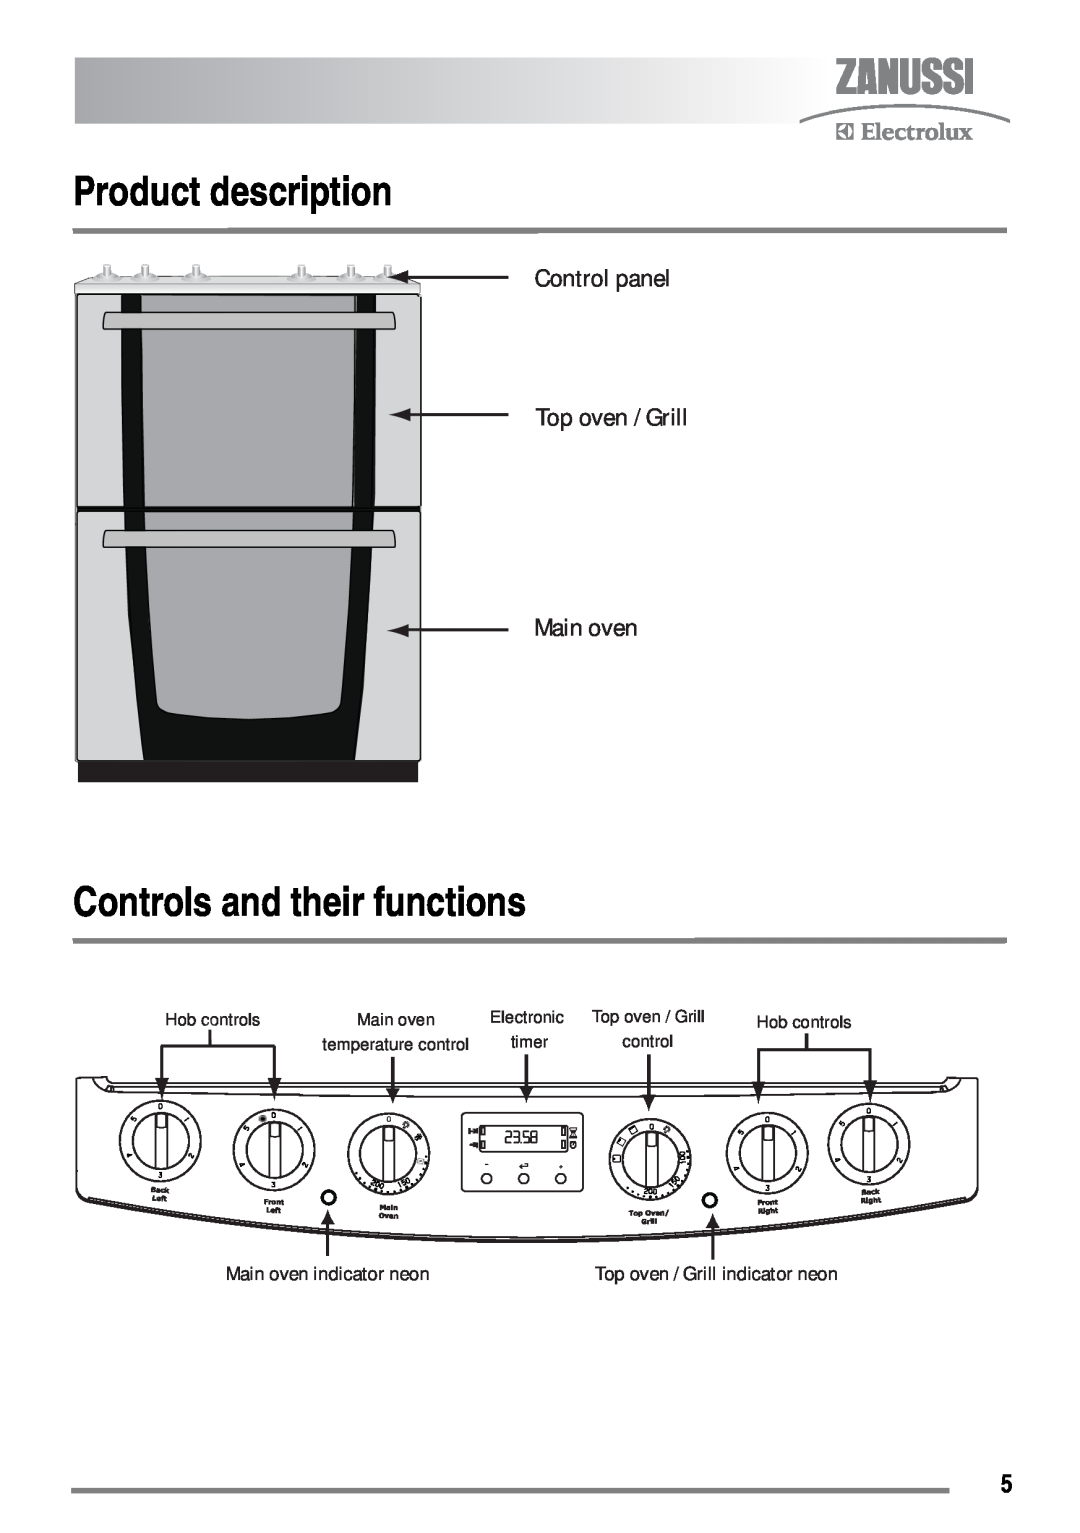 Zanussi ZKC6040 Product description, Controls and their functions, Control panel Top oven / Grill Main oven, Electronic 